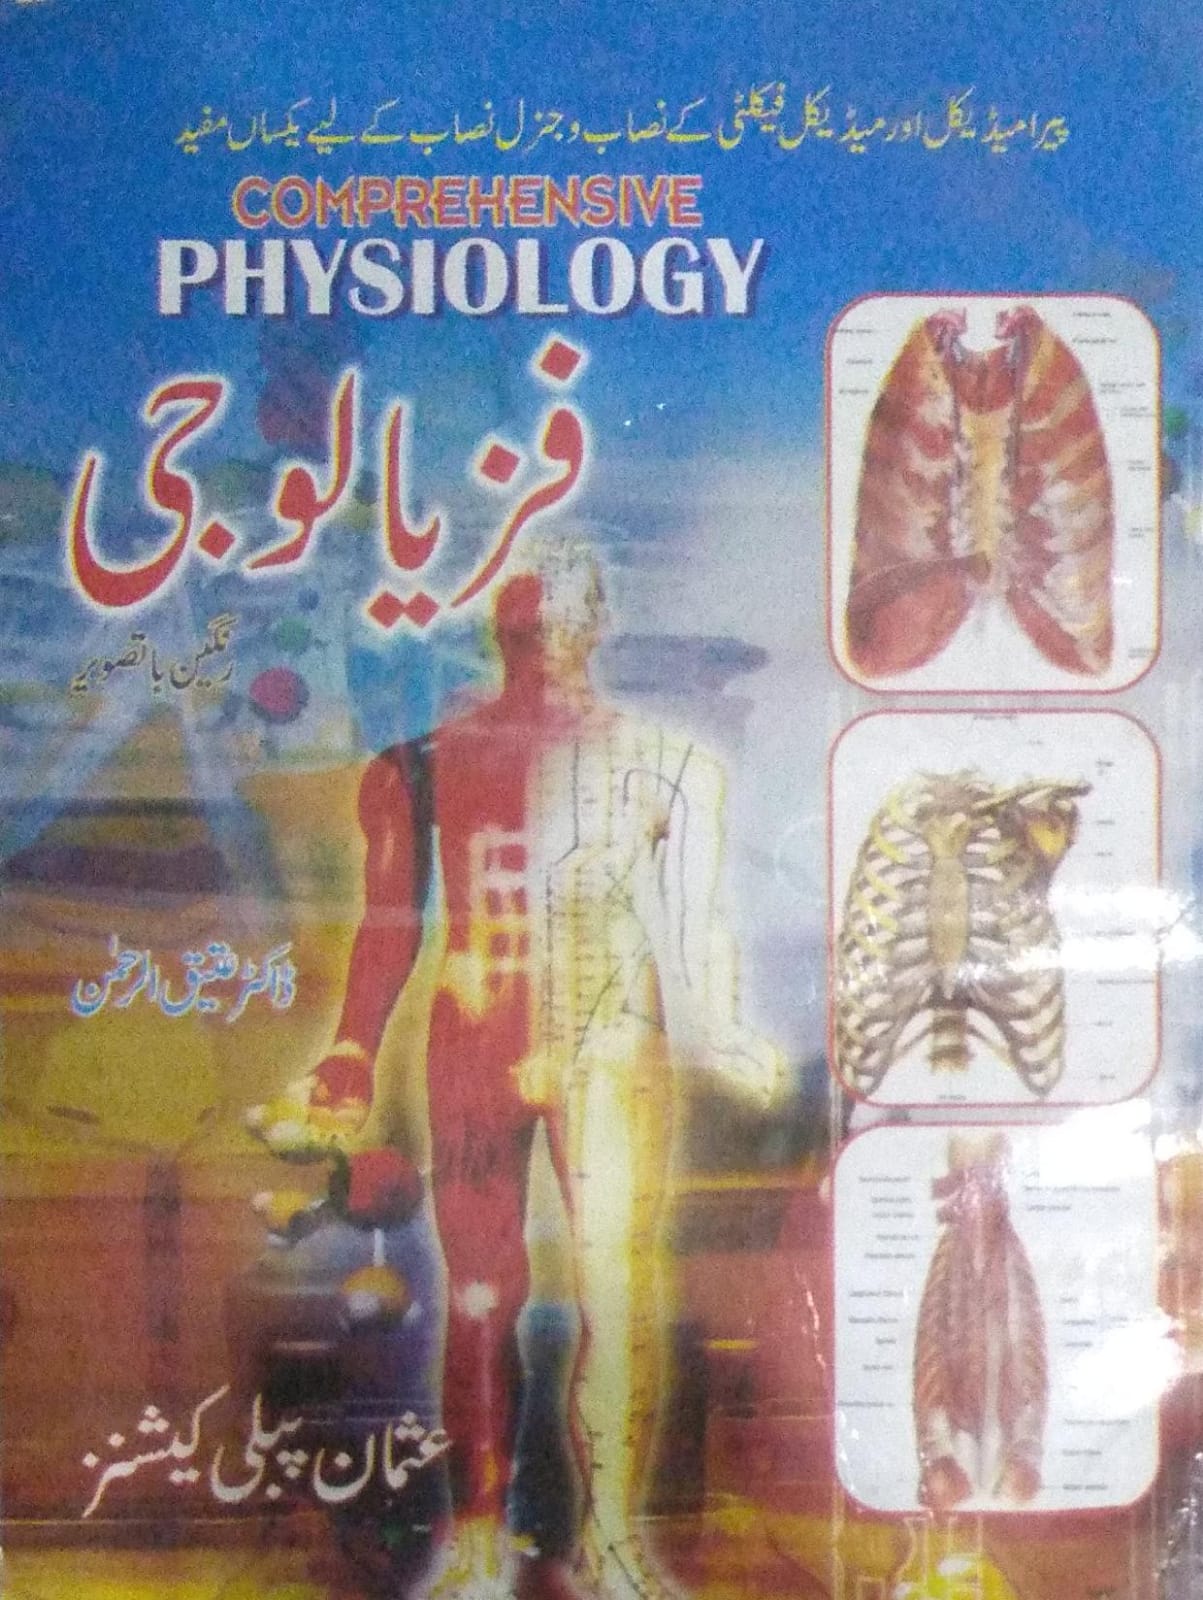 COMPREHENSIVE PHYSIOLOGY color with pictures